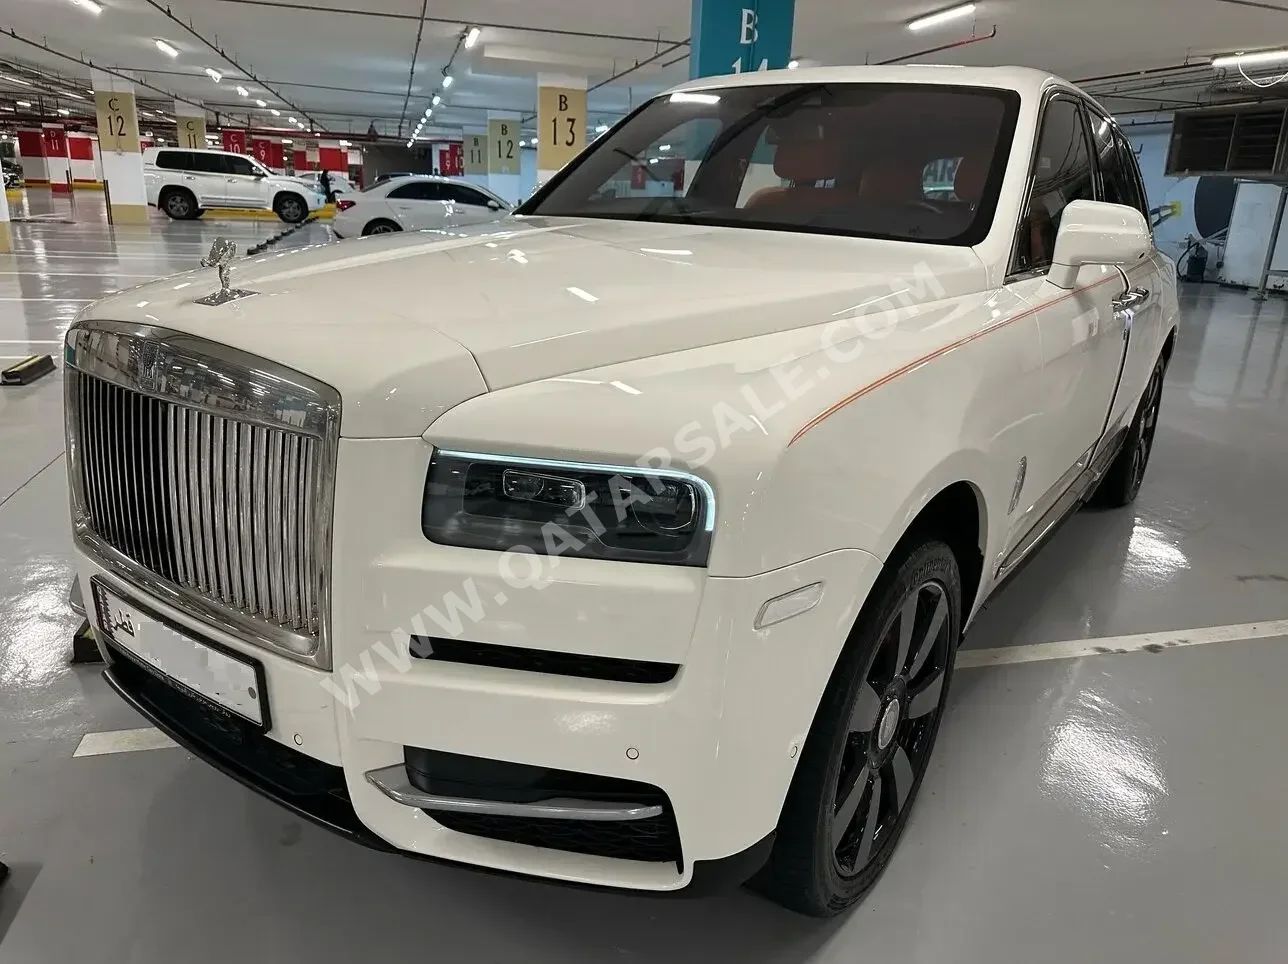 Rolls-Royce  Cullinan  2022  Automatic  12,000 Km  12 Cylinder  Four Wheel Drive (4WD)  SUV  White  With Warranty